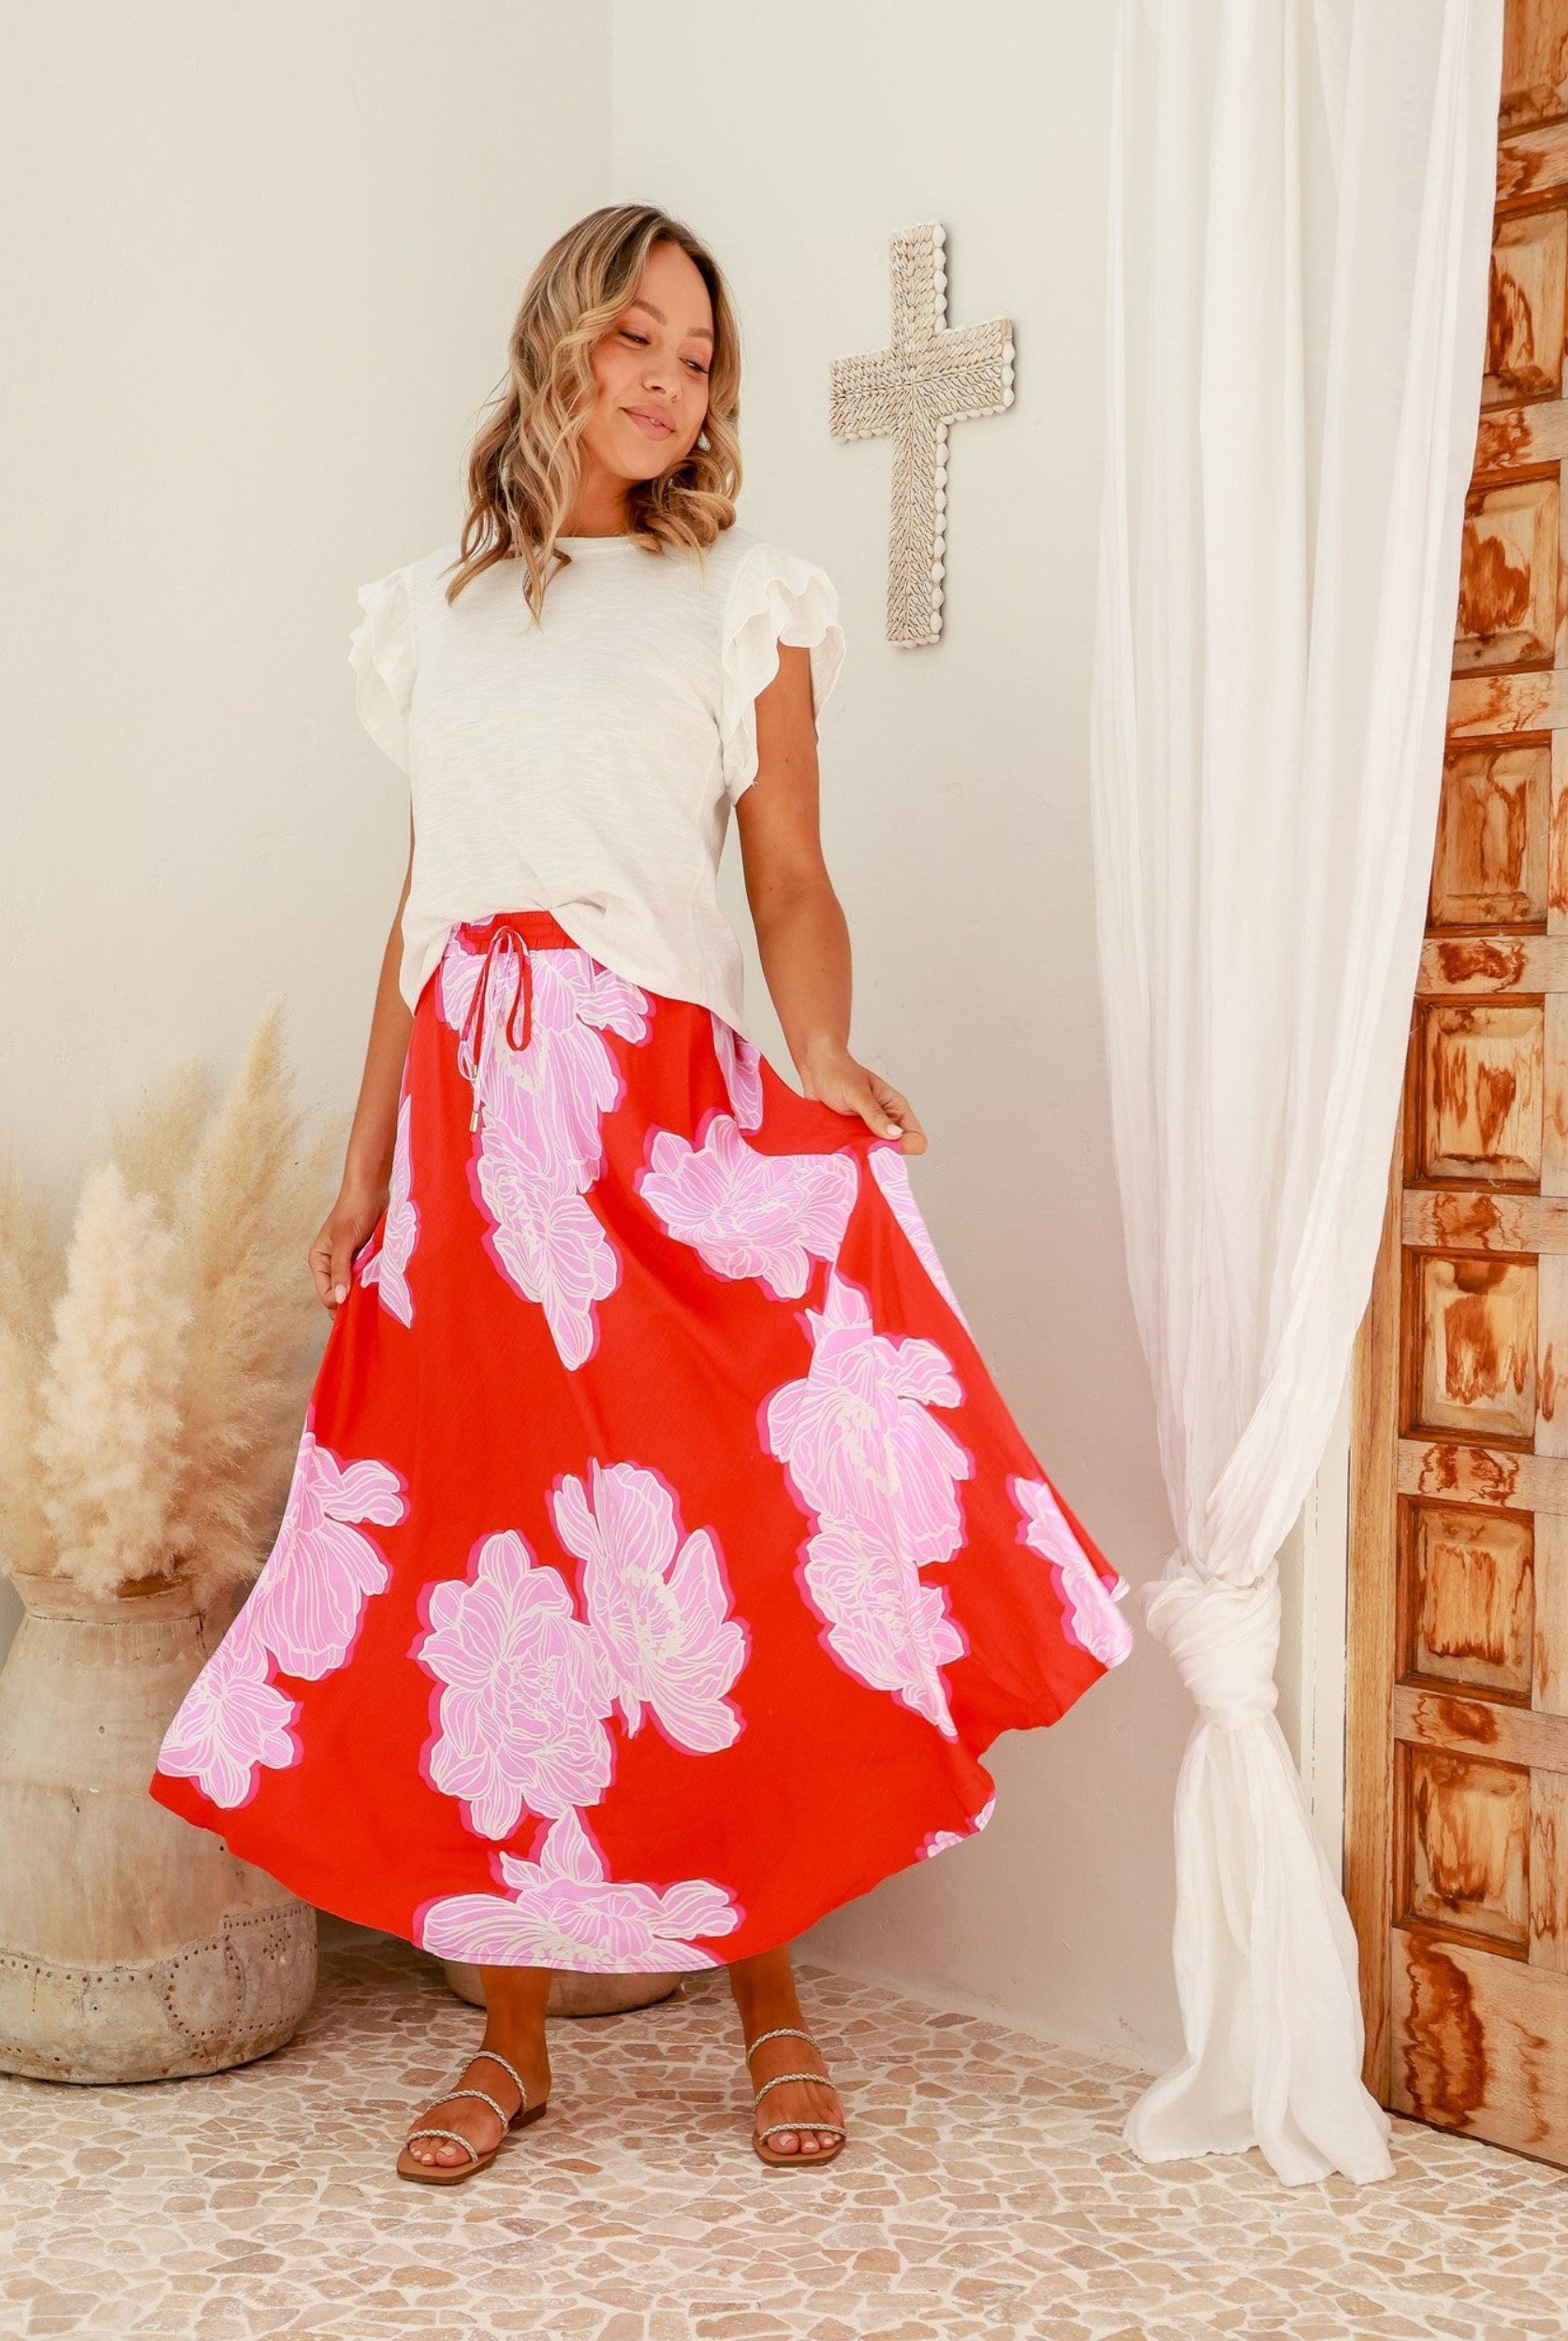 Red base floral midi skirt with white and pink flowers and ties at the waistband